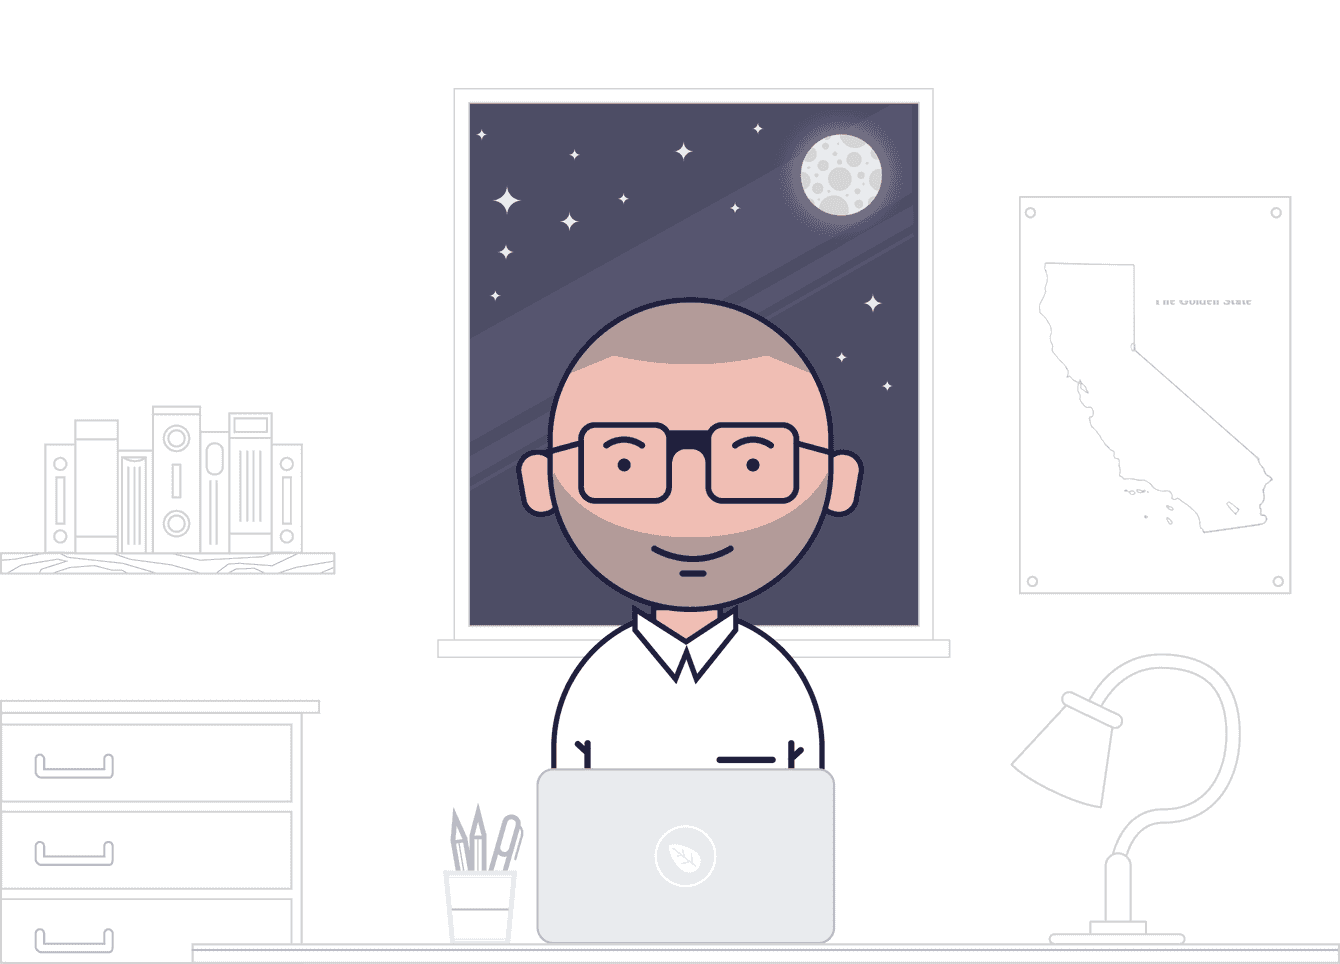 Illustration of Joe working in the evening